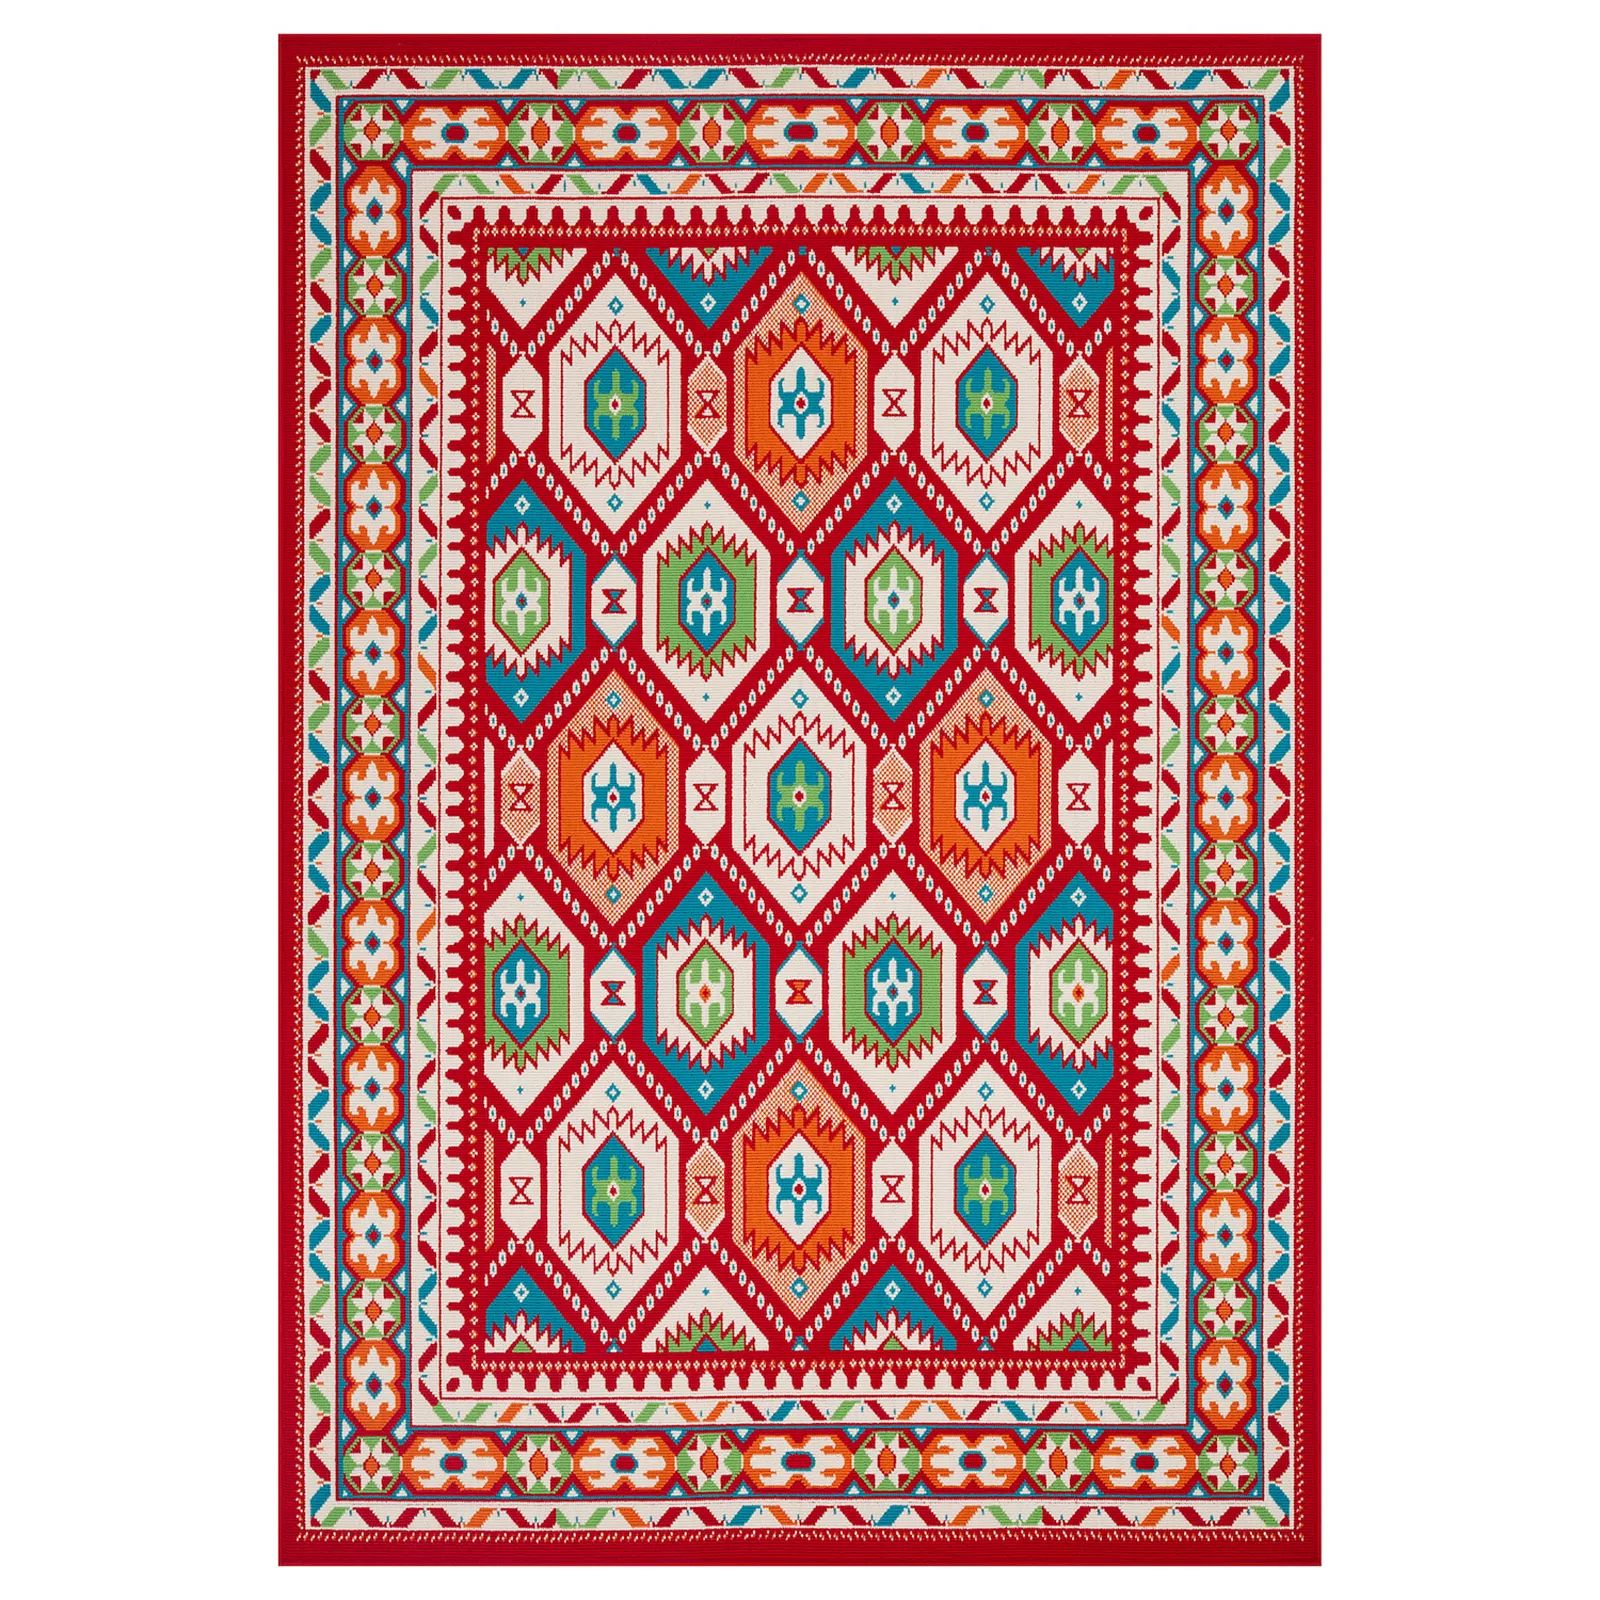 Sonoma Goods for Life Ikat Border Indoor Outdoor Rug, Red, 4X6 Ft | Kohl's